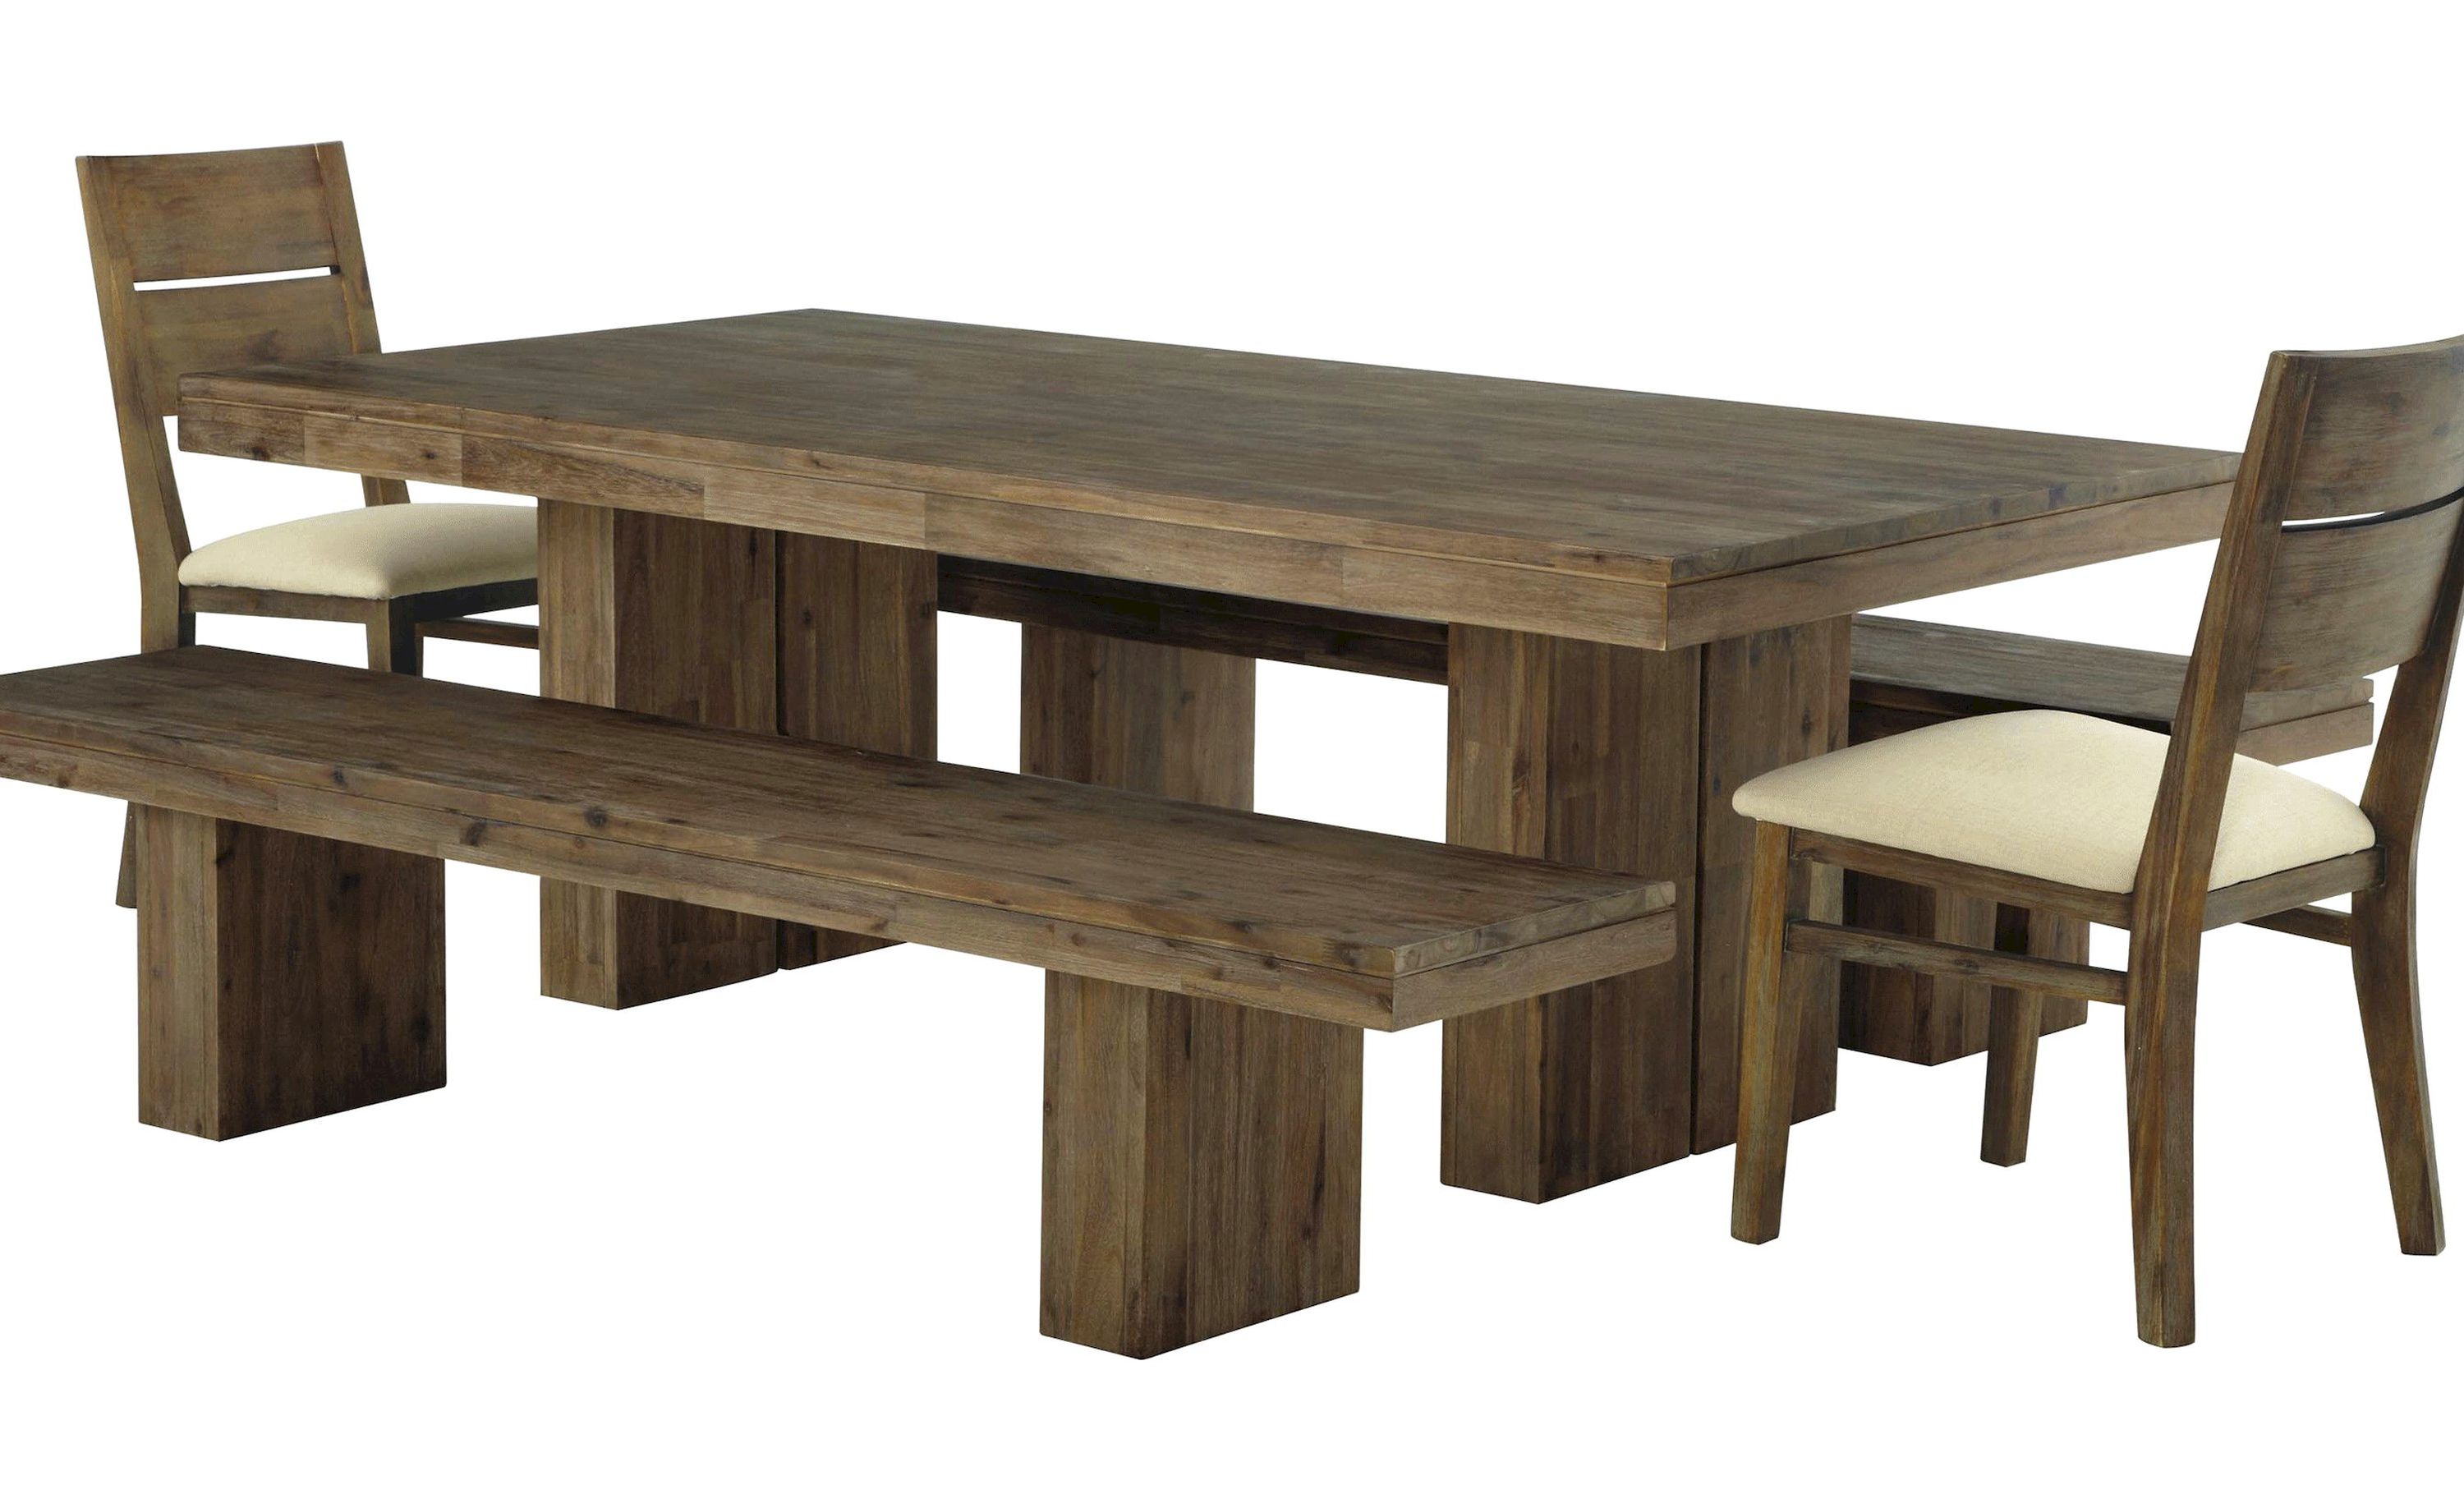 Square Wood Kitchen Table photo - 2